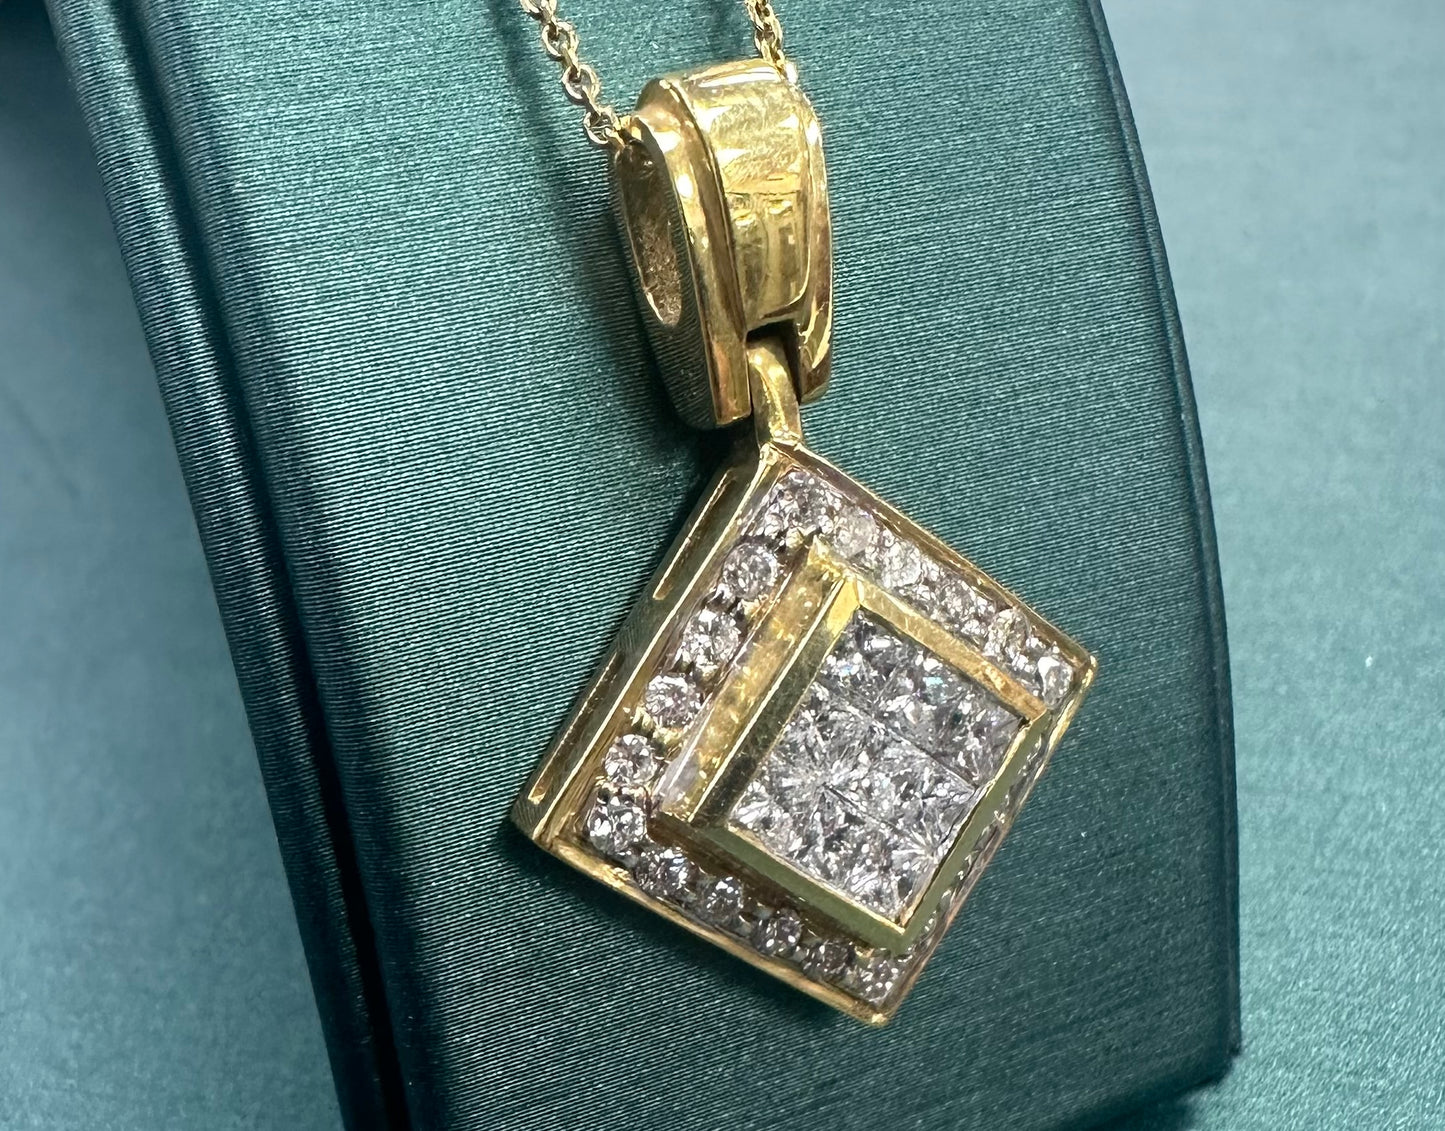 The great diamond square necklace